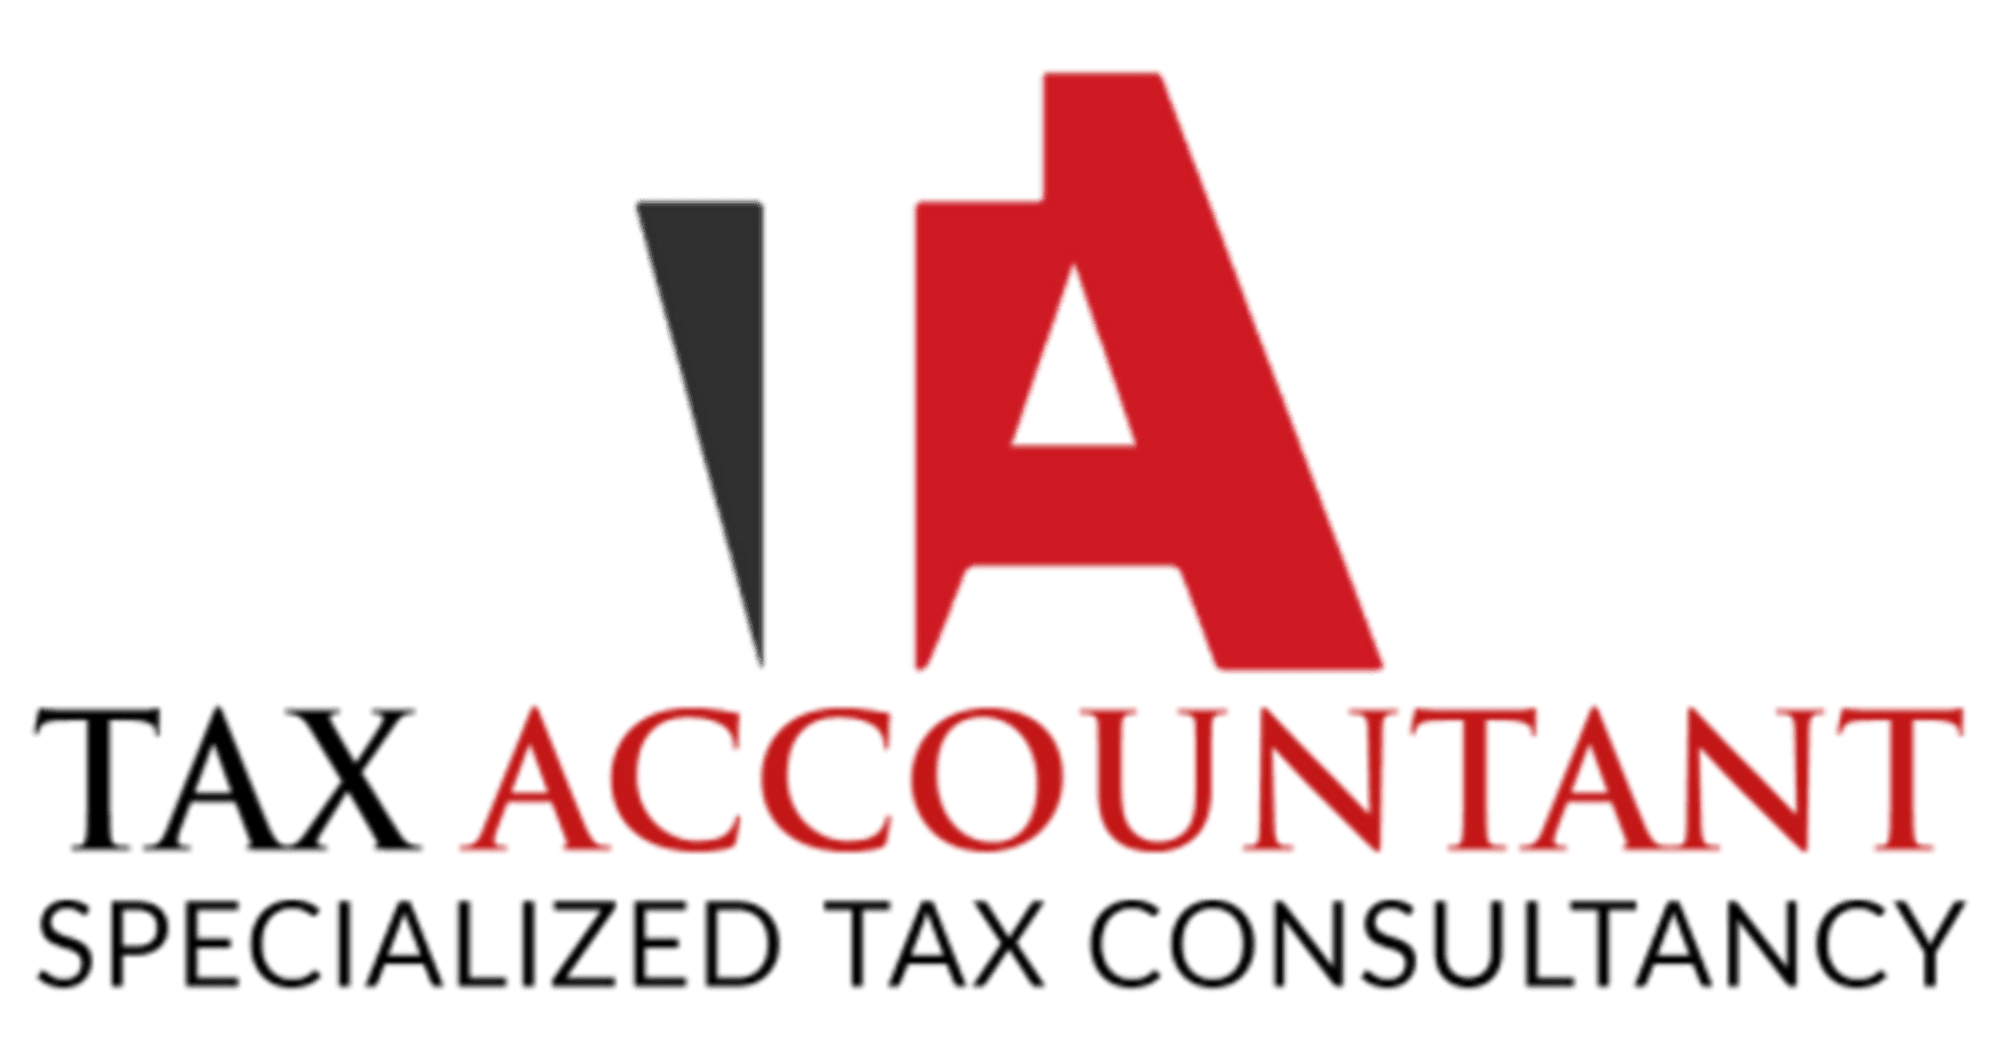 Images Tax Accountant - Specialist Tax Consultancy